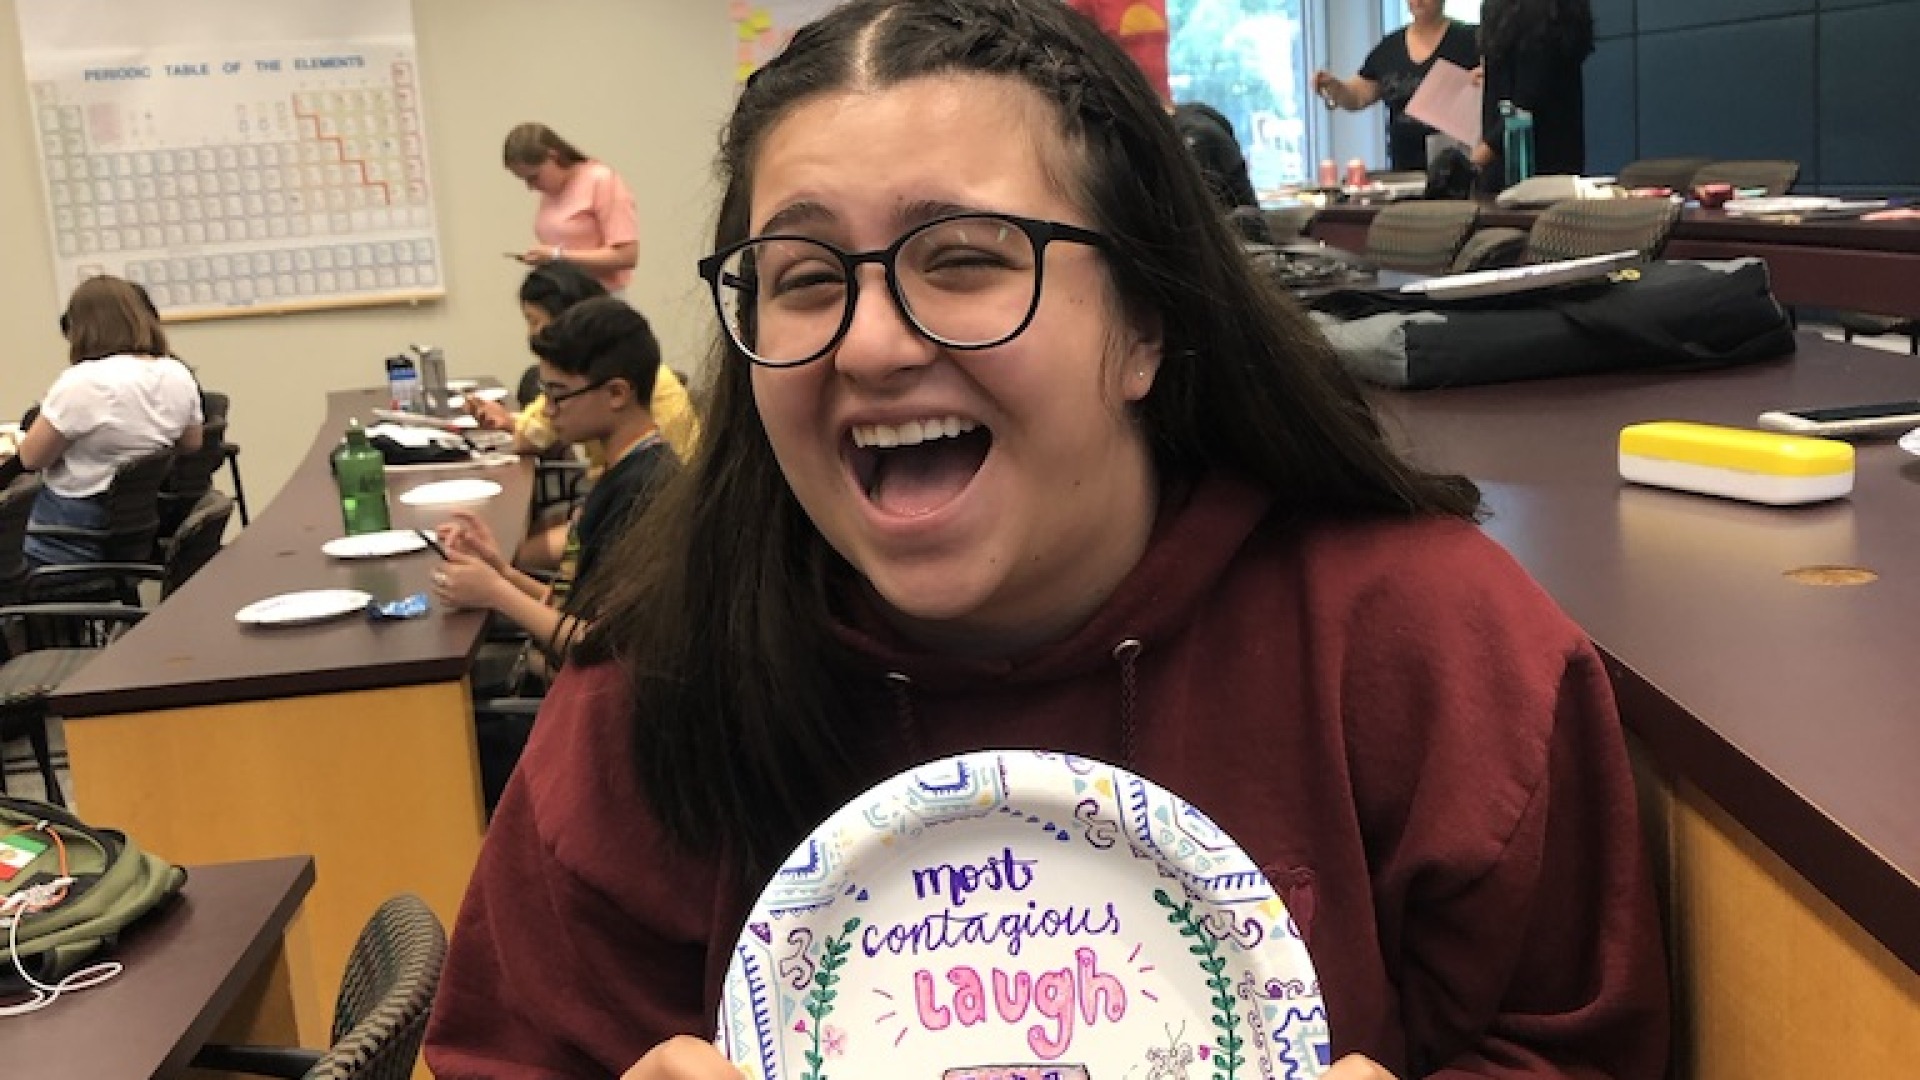 Eva laughing as she displays her award a hand-decorated paper plate with most contagious laugh Eva